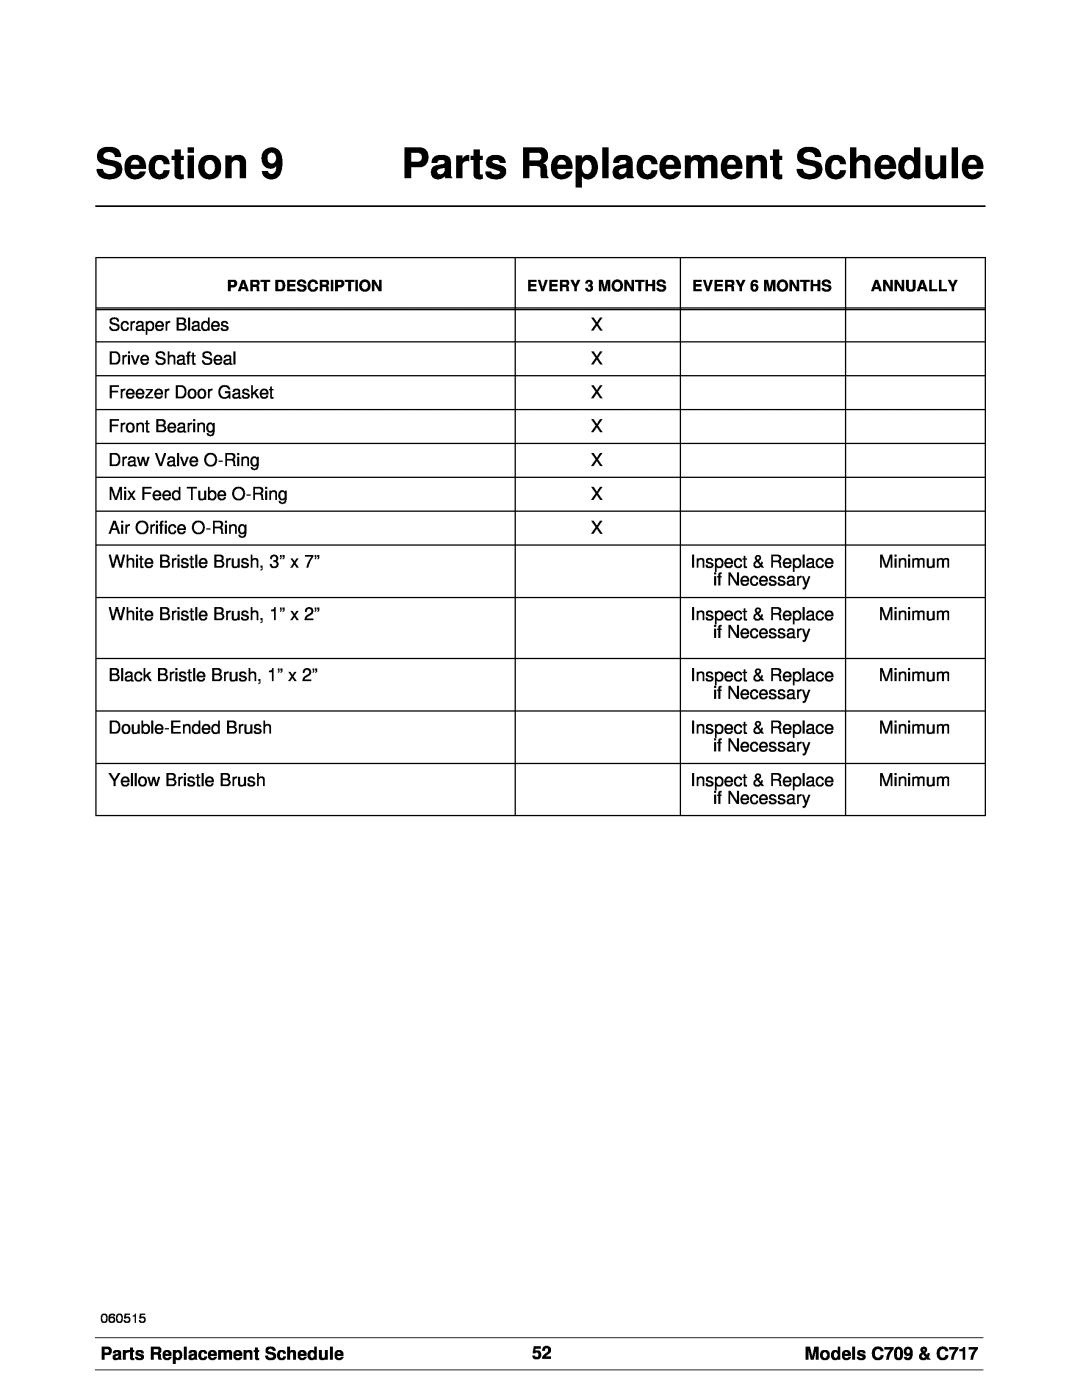 Taylor manual Parts Replacement Schedule, Models C709 & C717, Part Description, EVERY 3 MONTHS, EVERY 6 MONTHS, Annually 